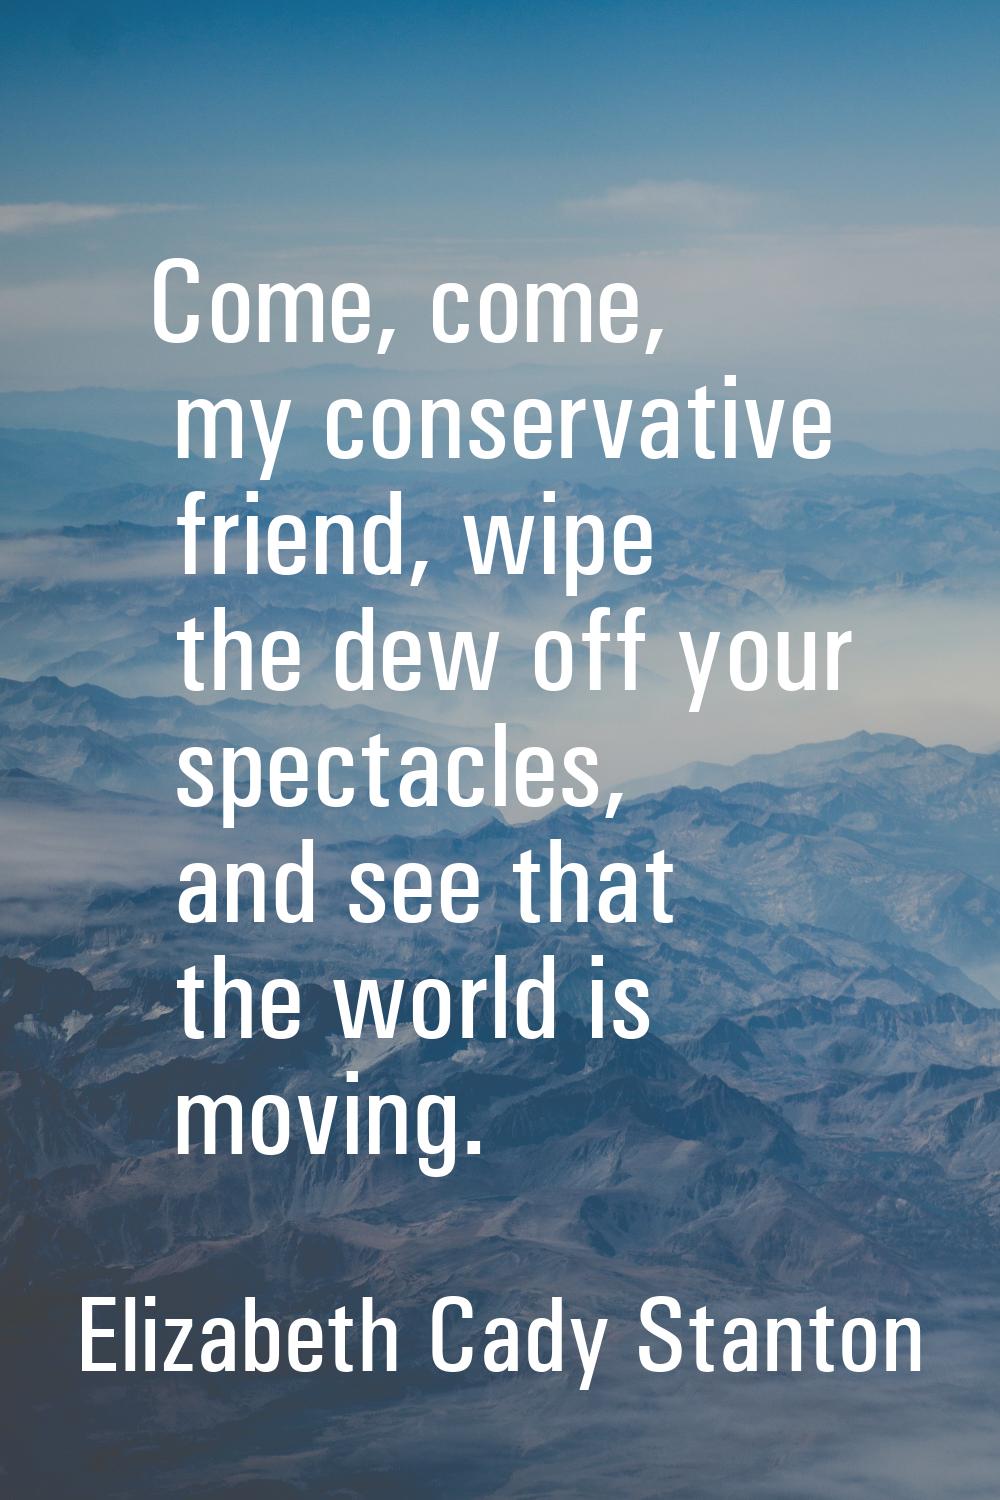 Come, come, my conservative friend, wipe the dew off your spectacles, and see that the world is mov